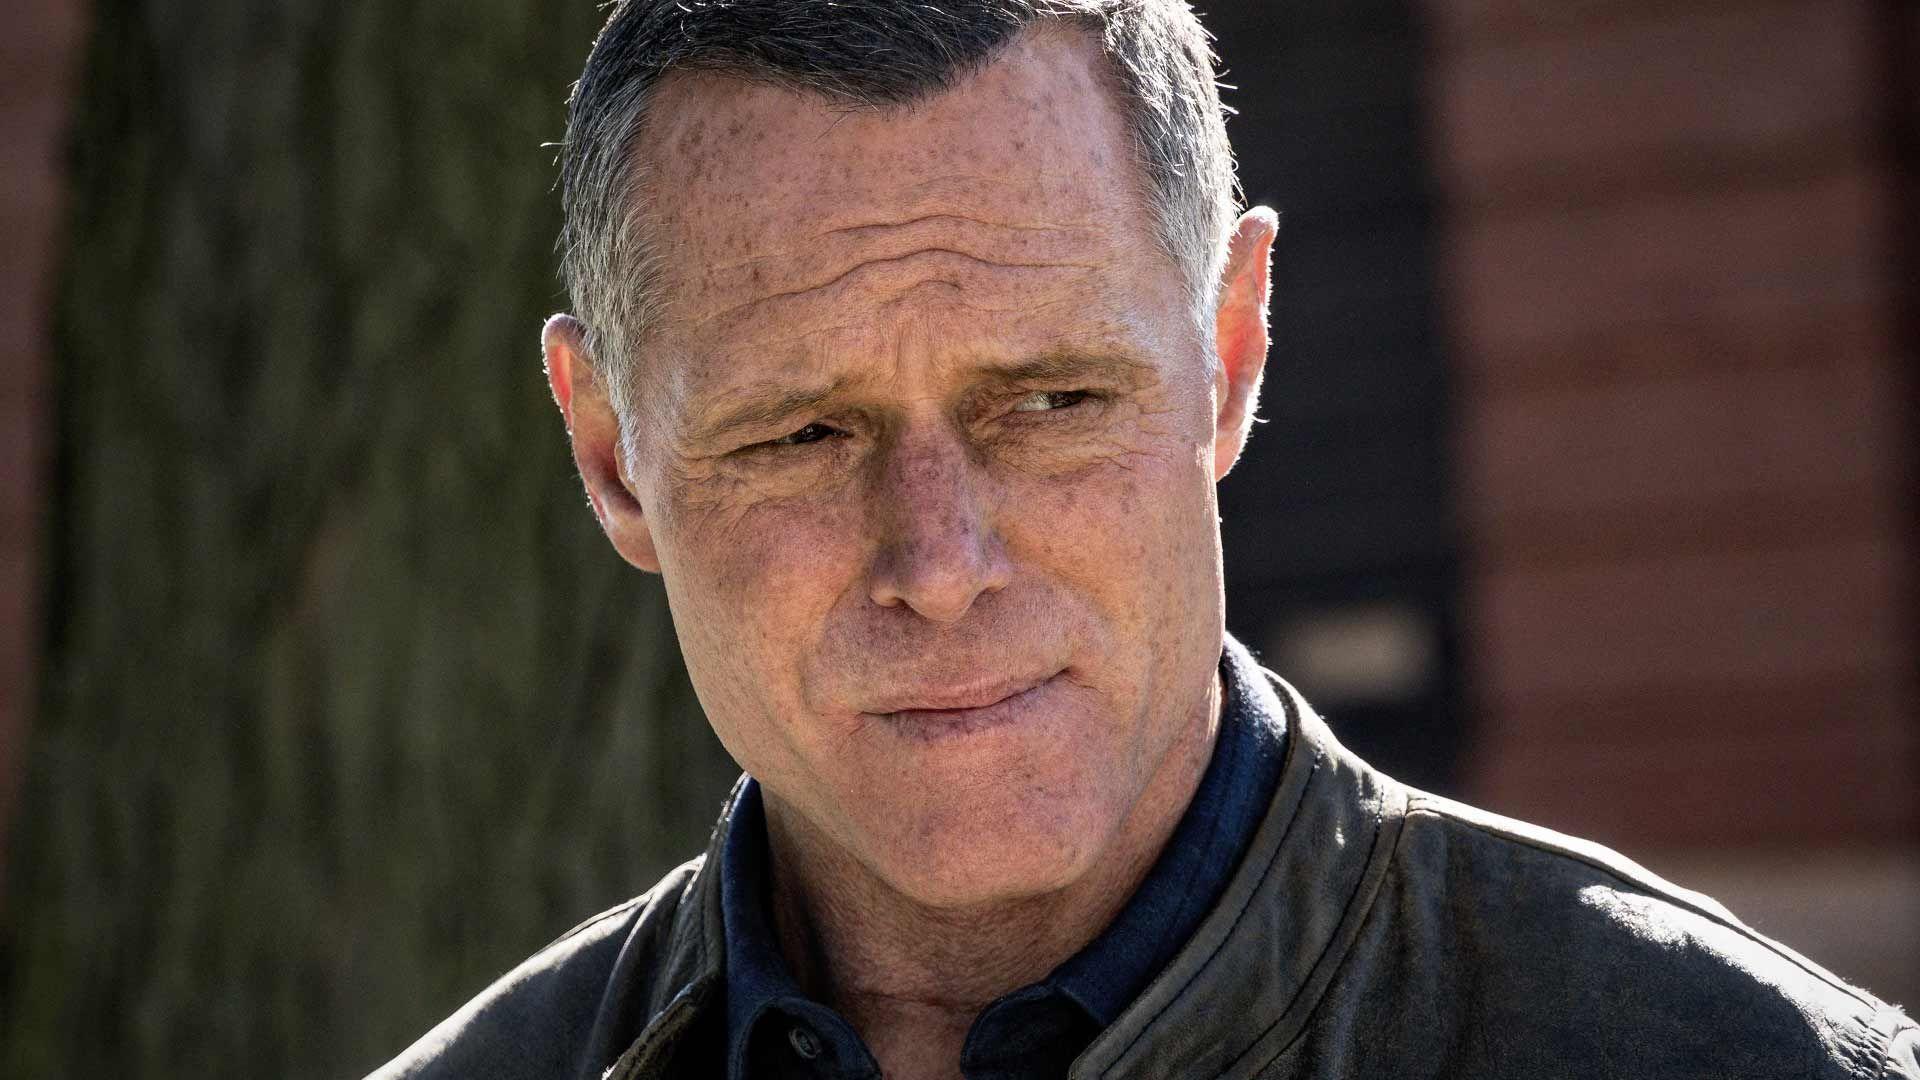 Chicago P.D.' Star Jason Beghe Ordered Not to Smoke in